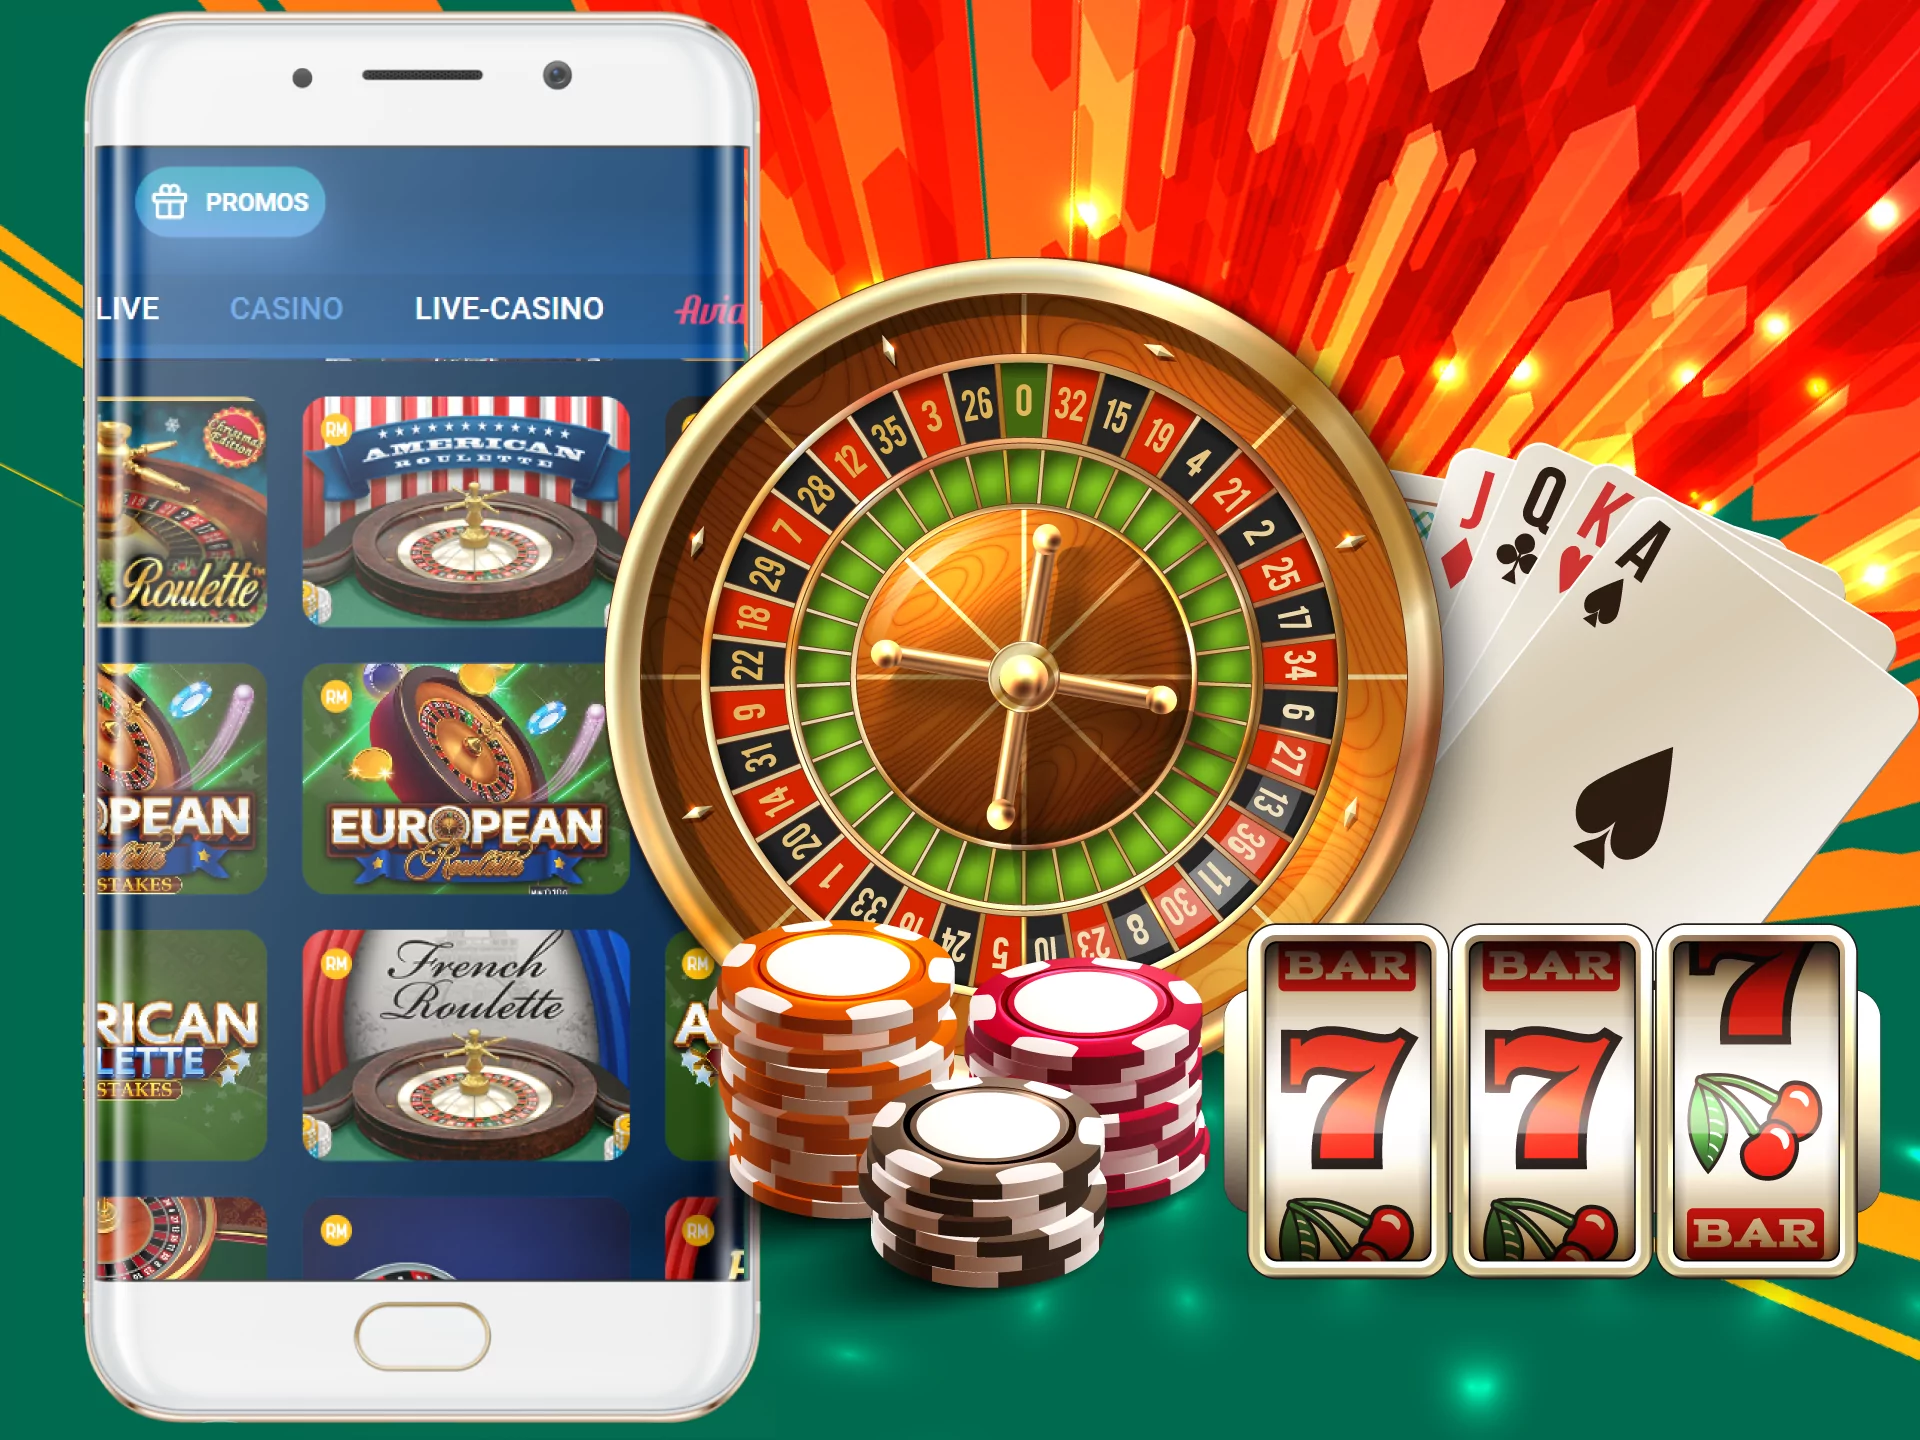 Play roulettes and try to win big prizes at Mostbet.